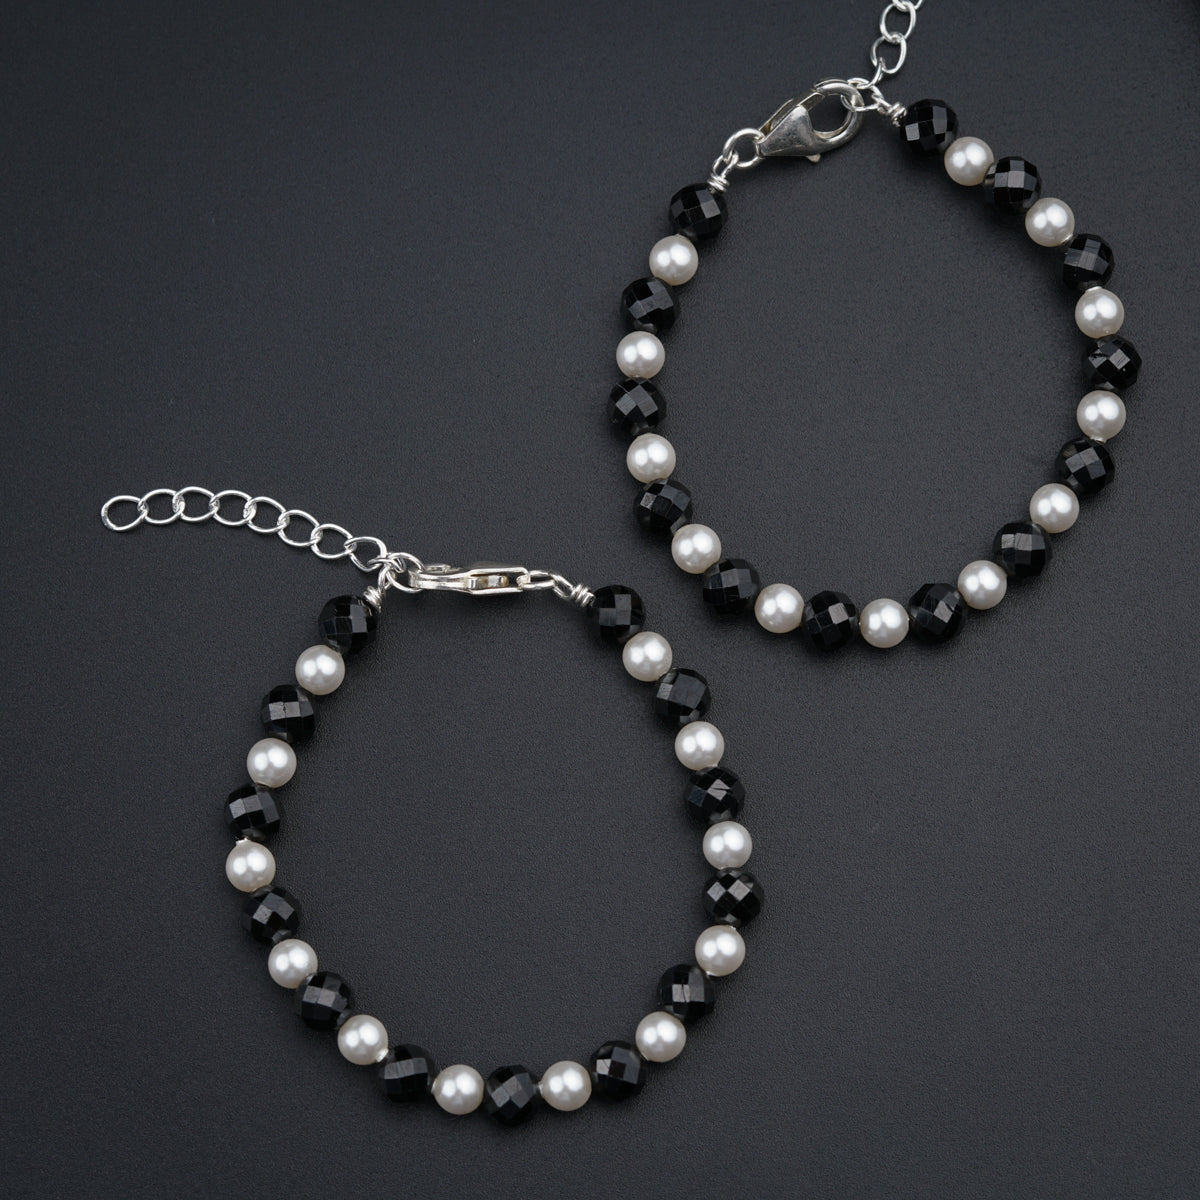 a pair of bracelets with pearls and black beads